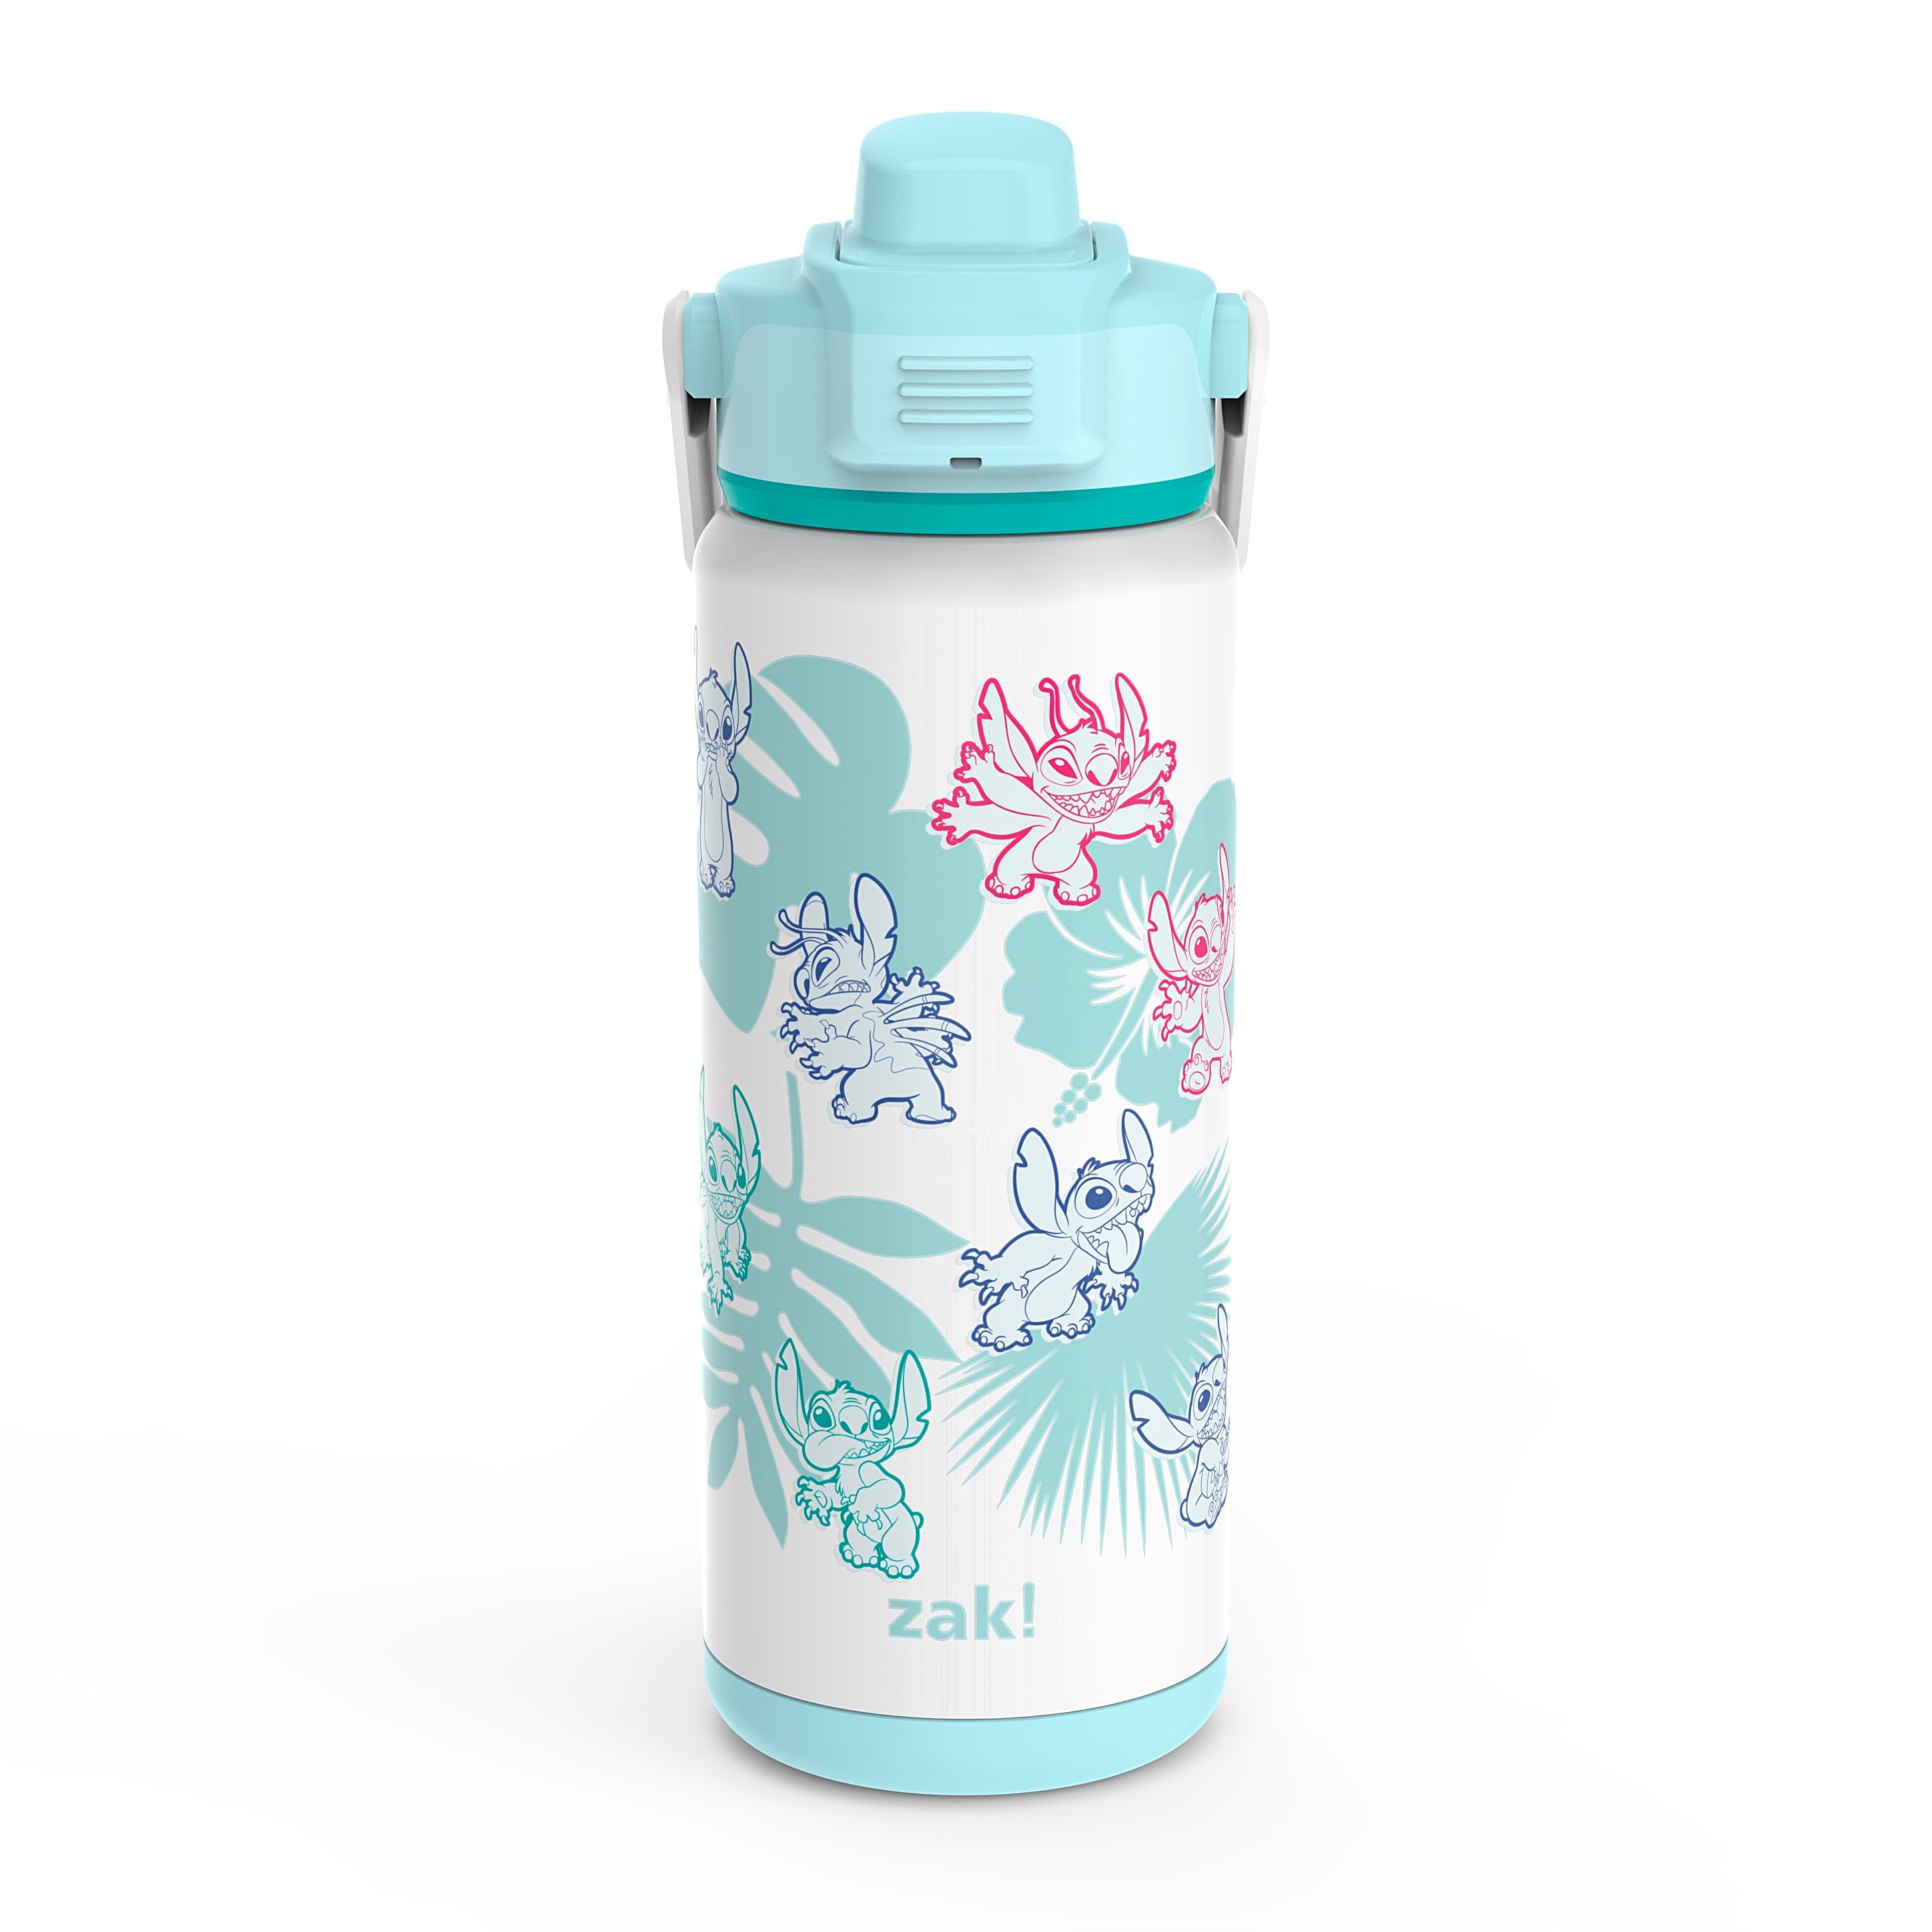 Disney Lilo &amp; Stitch Beacon Stainless Steel Insulated Kids Water Bottle with Covered Spout, 20 Ounces